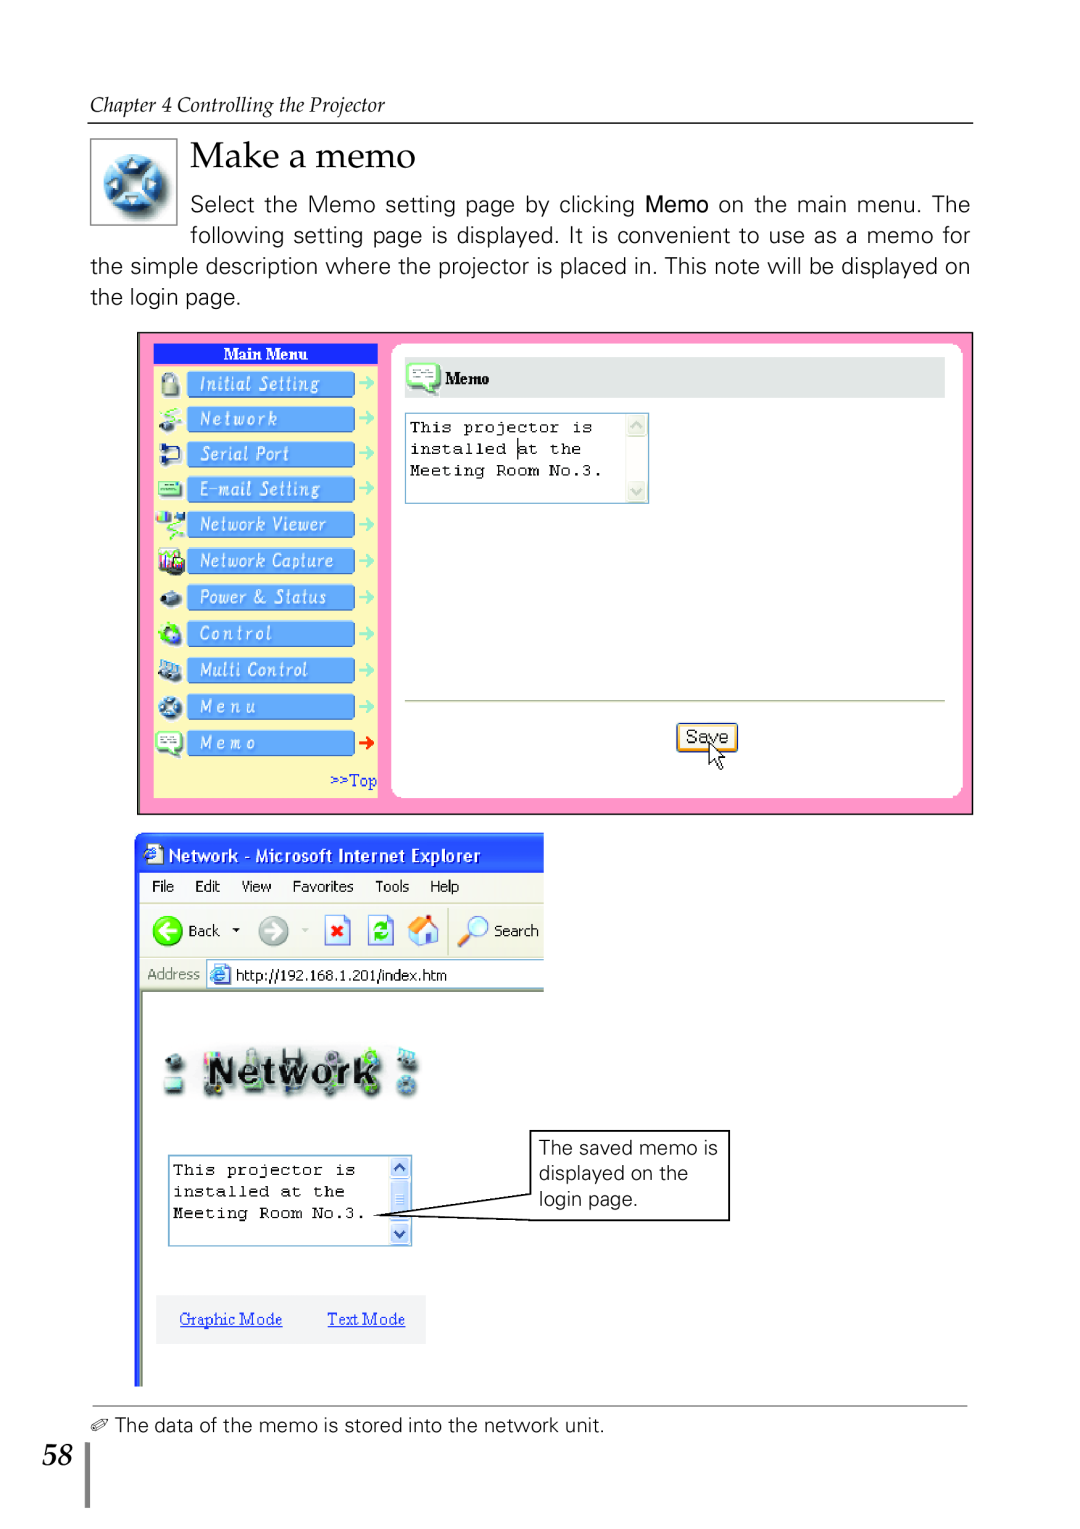 Eiki PjNET-20 owner manual Make a memo, the login page, Controlling the Projector 